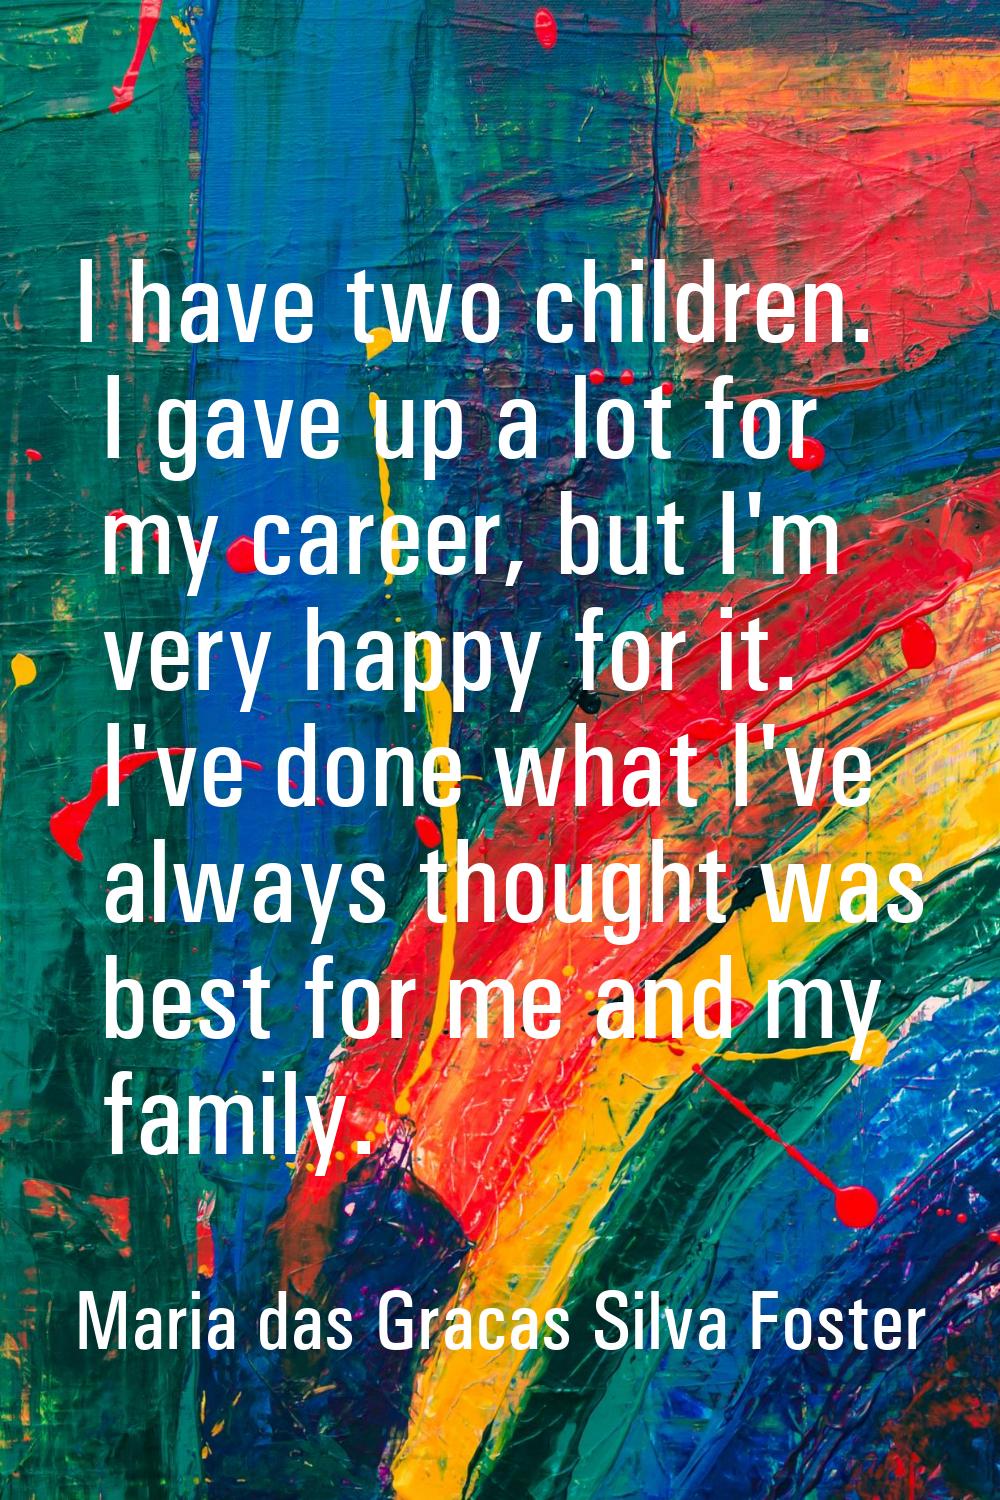 I have two children. I gave up a lot for my career, but I'm very happy for it. I've done what I've 